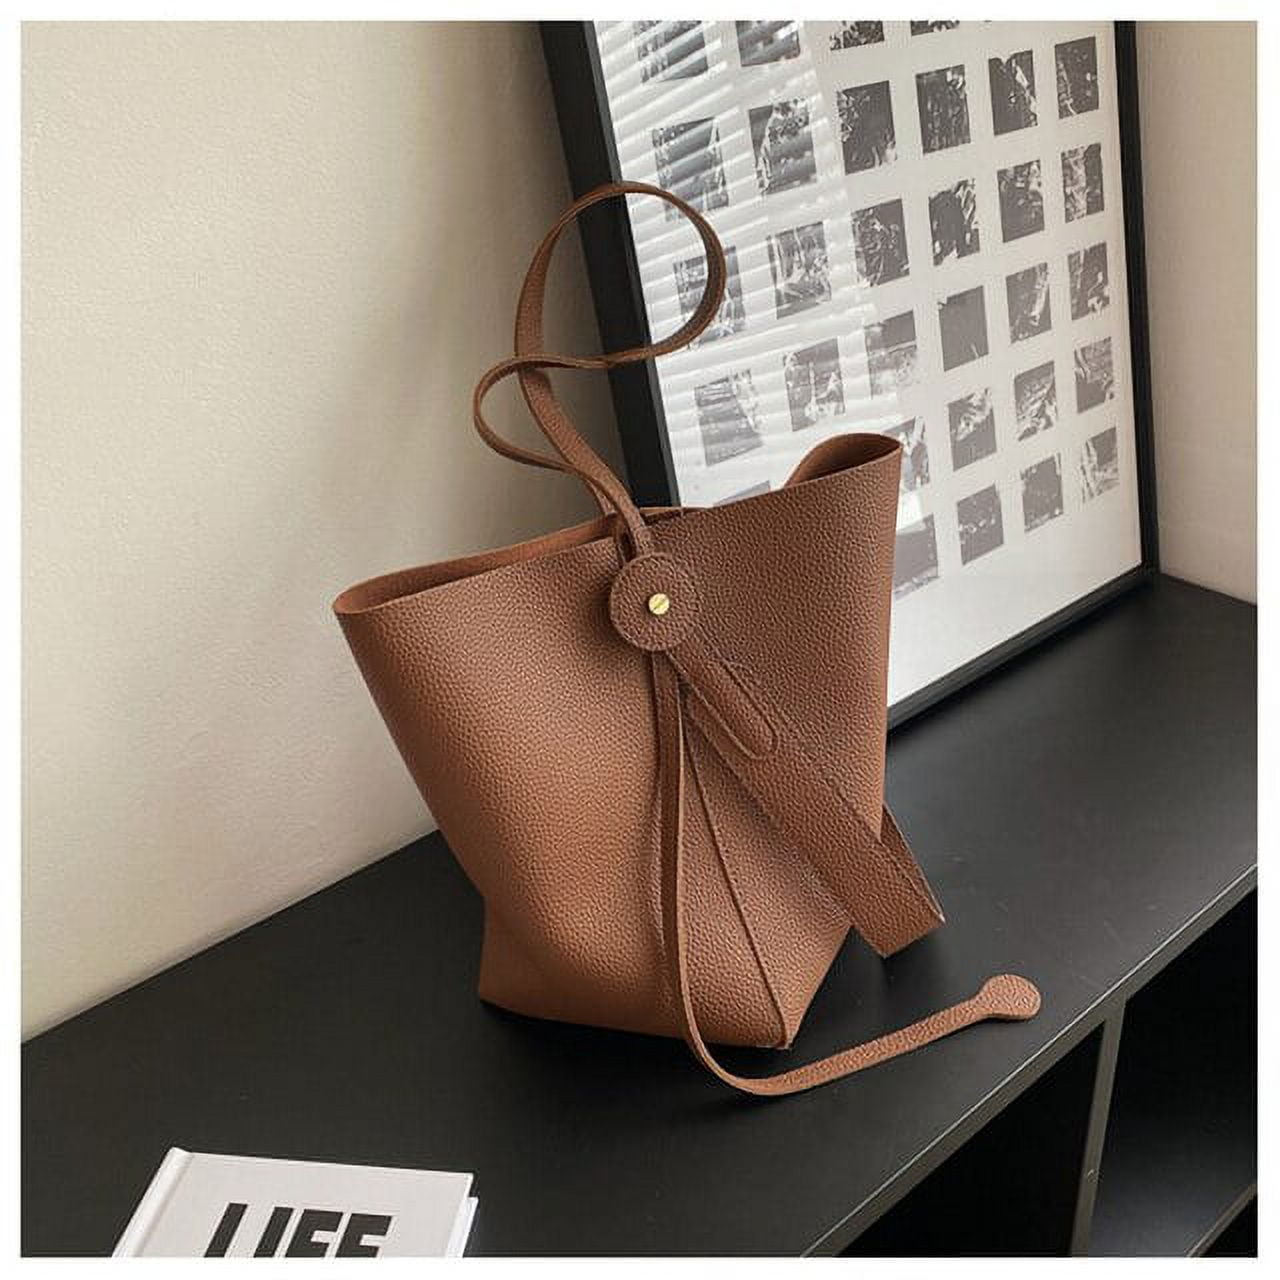 CoCopeaunt Solid Color Tote Bags for Women New Soft Leather Shoulder Bag  Ribbon Decoration Luxury Handbag Lady Casual Hot Sale Shopping Bag